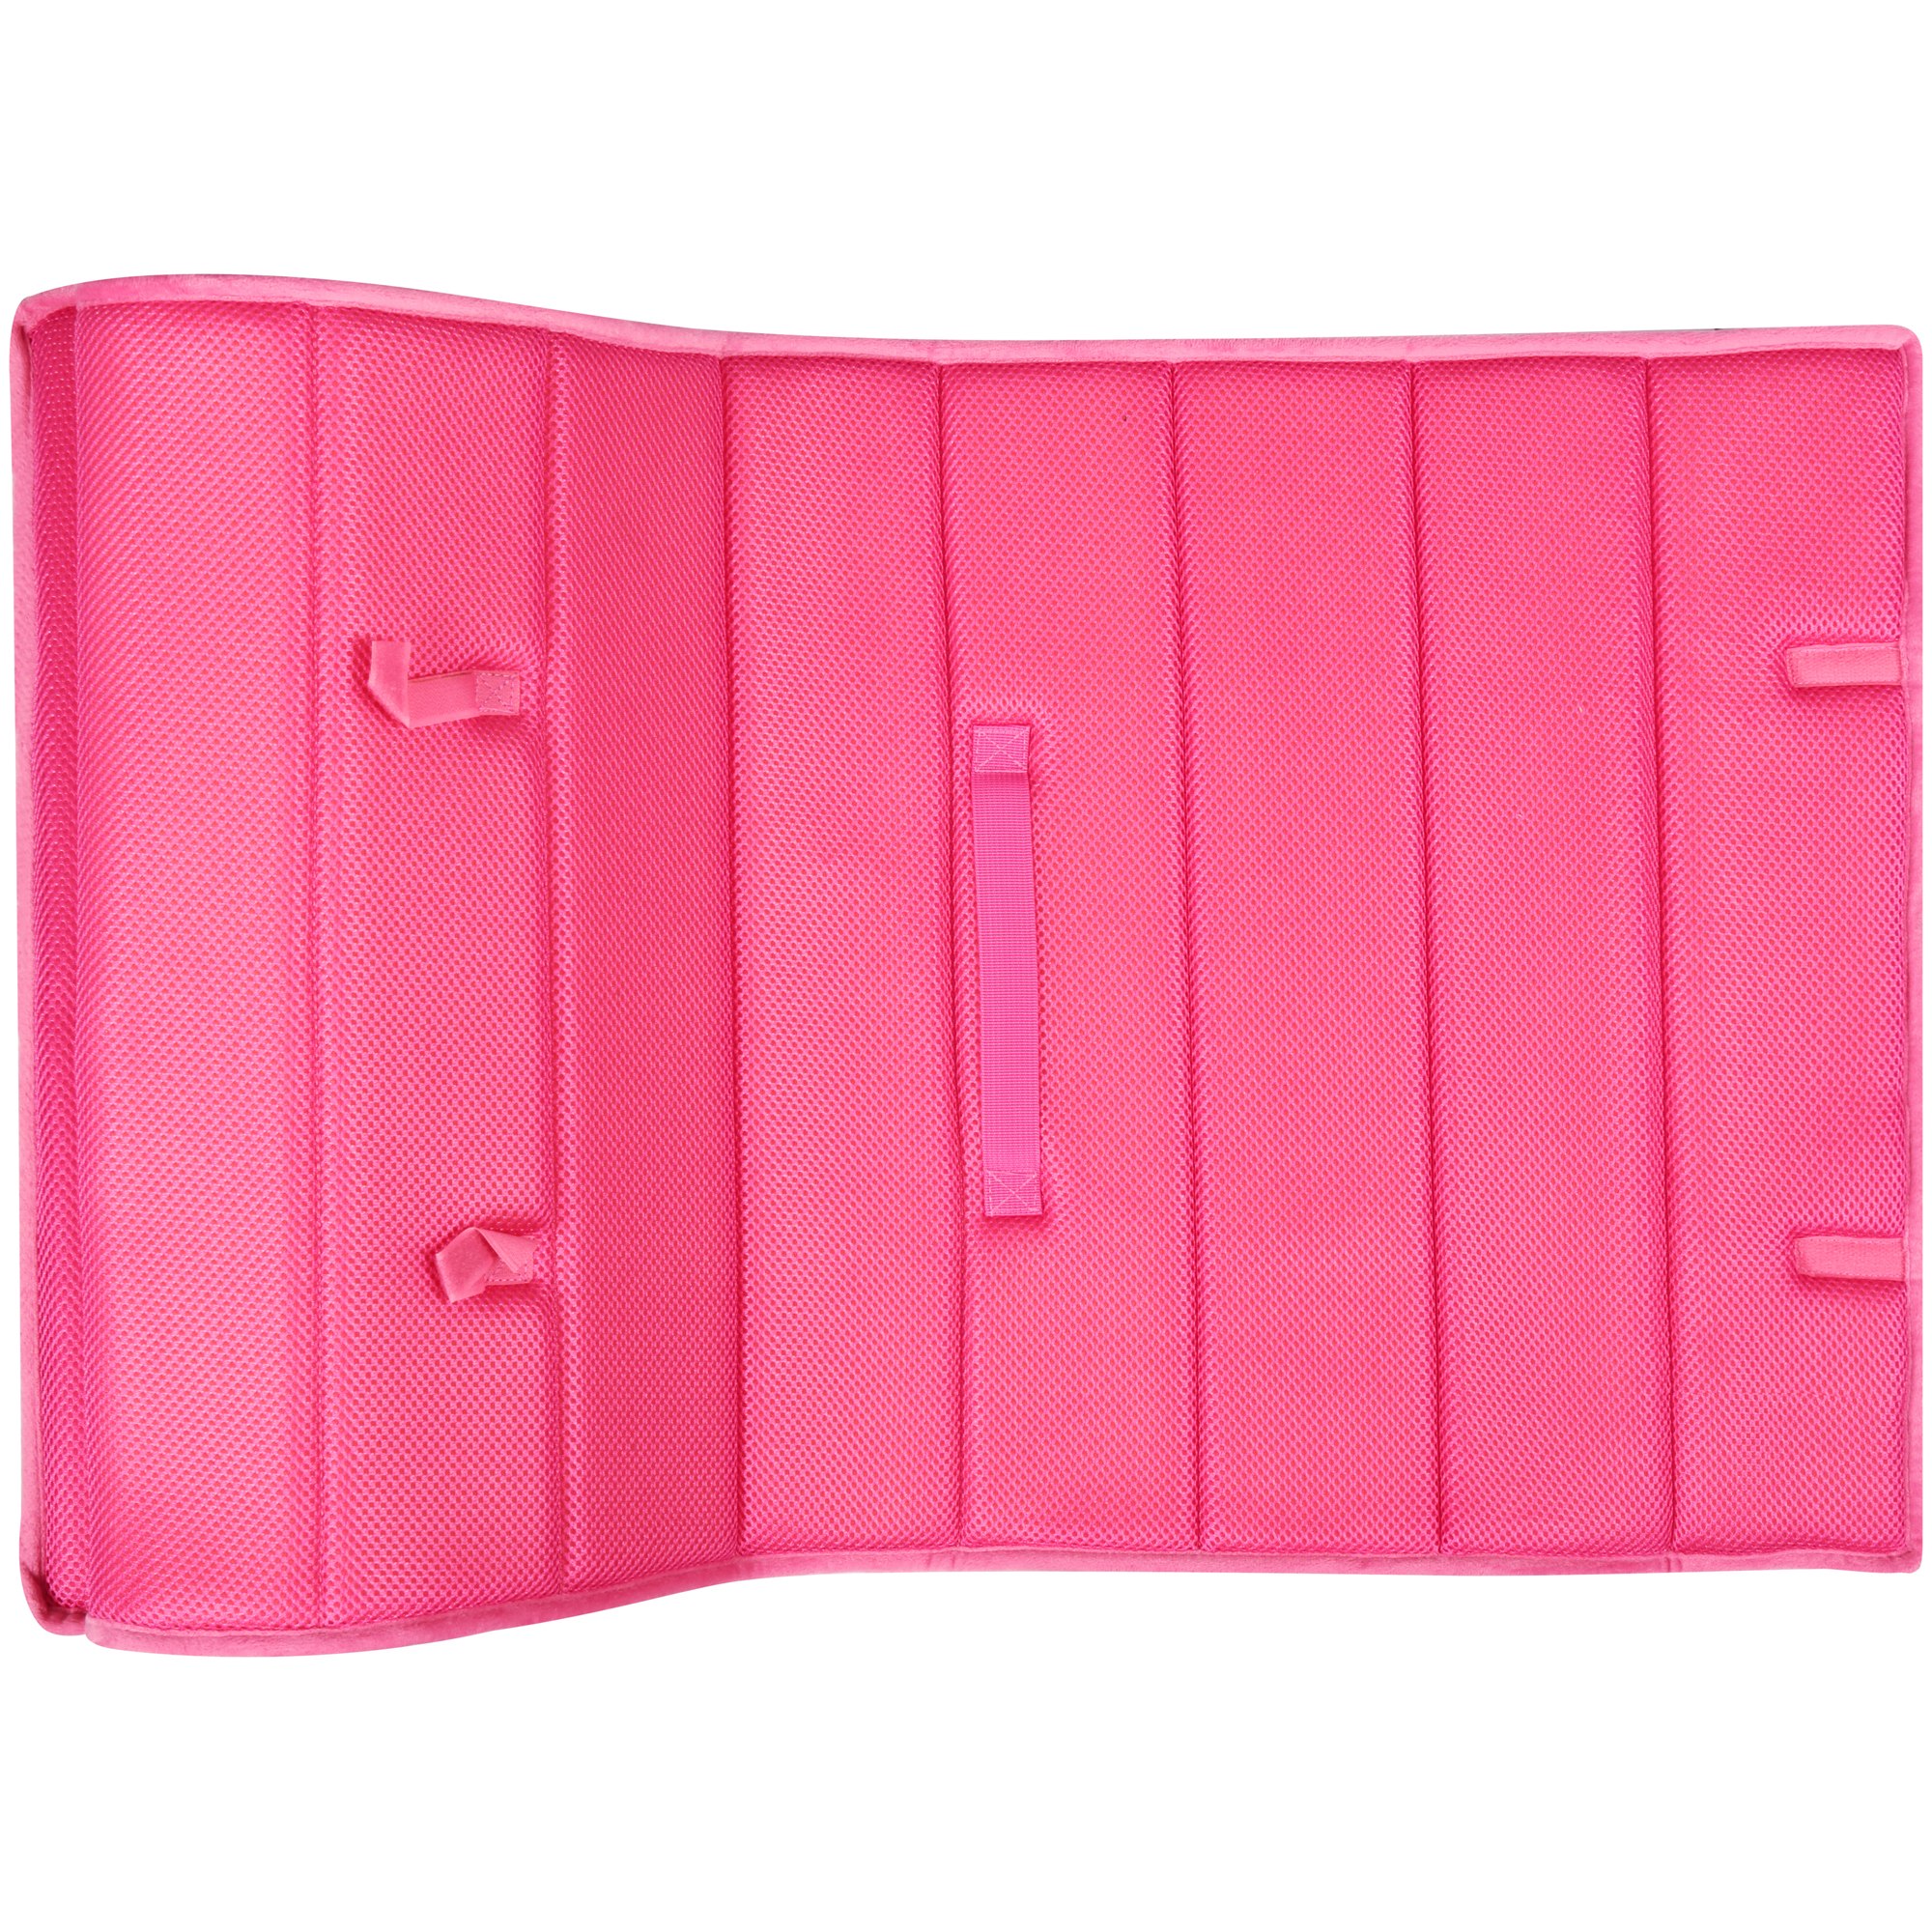 My First Pillow Female Pink Solid Memory Foam Nap Mats, Cushioned Removable Washable Cooling - image 2 of 5